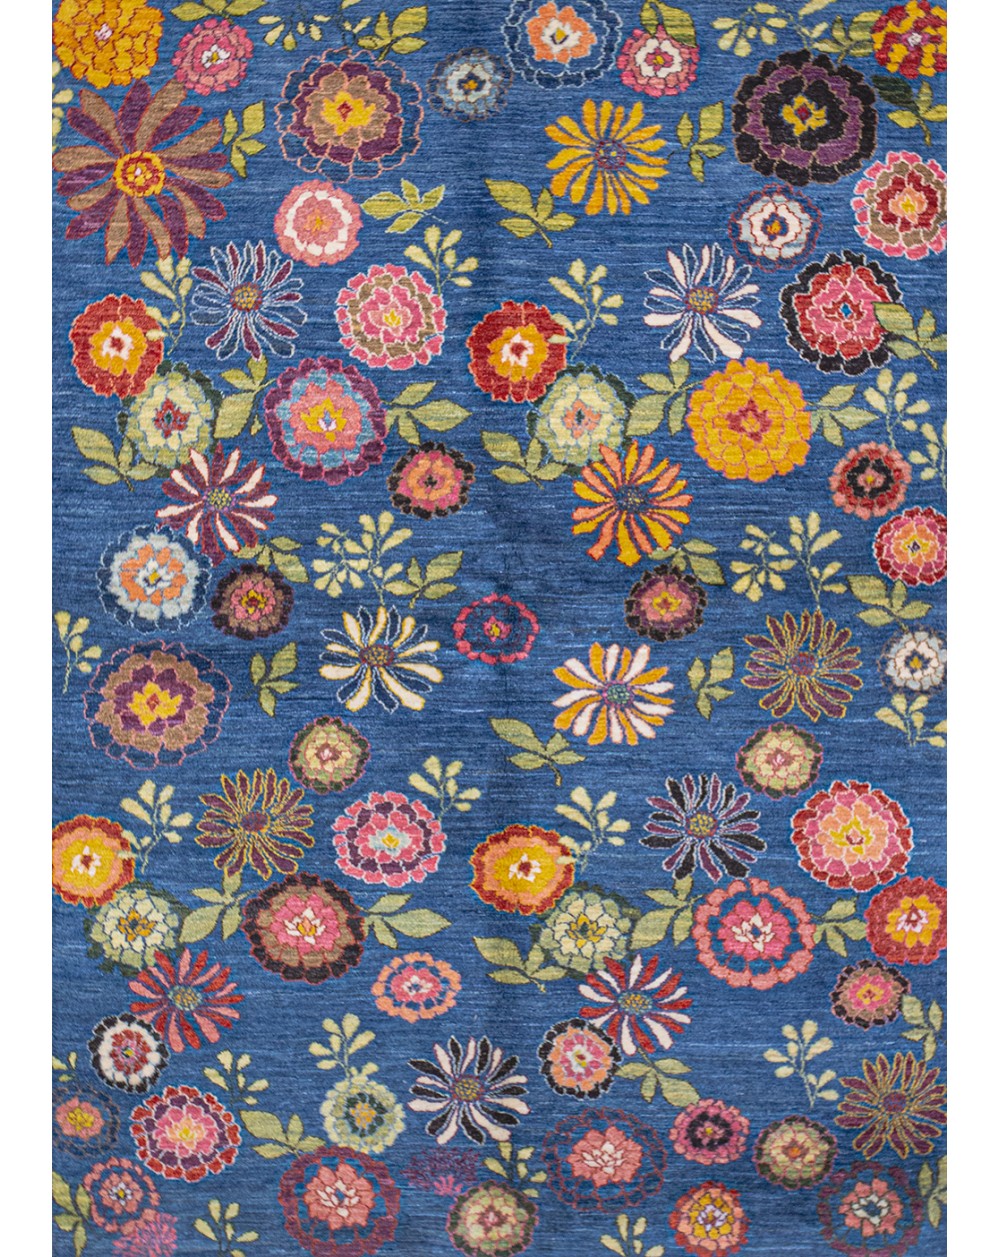 quality rug with flowers